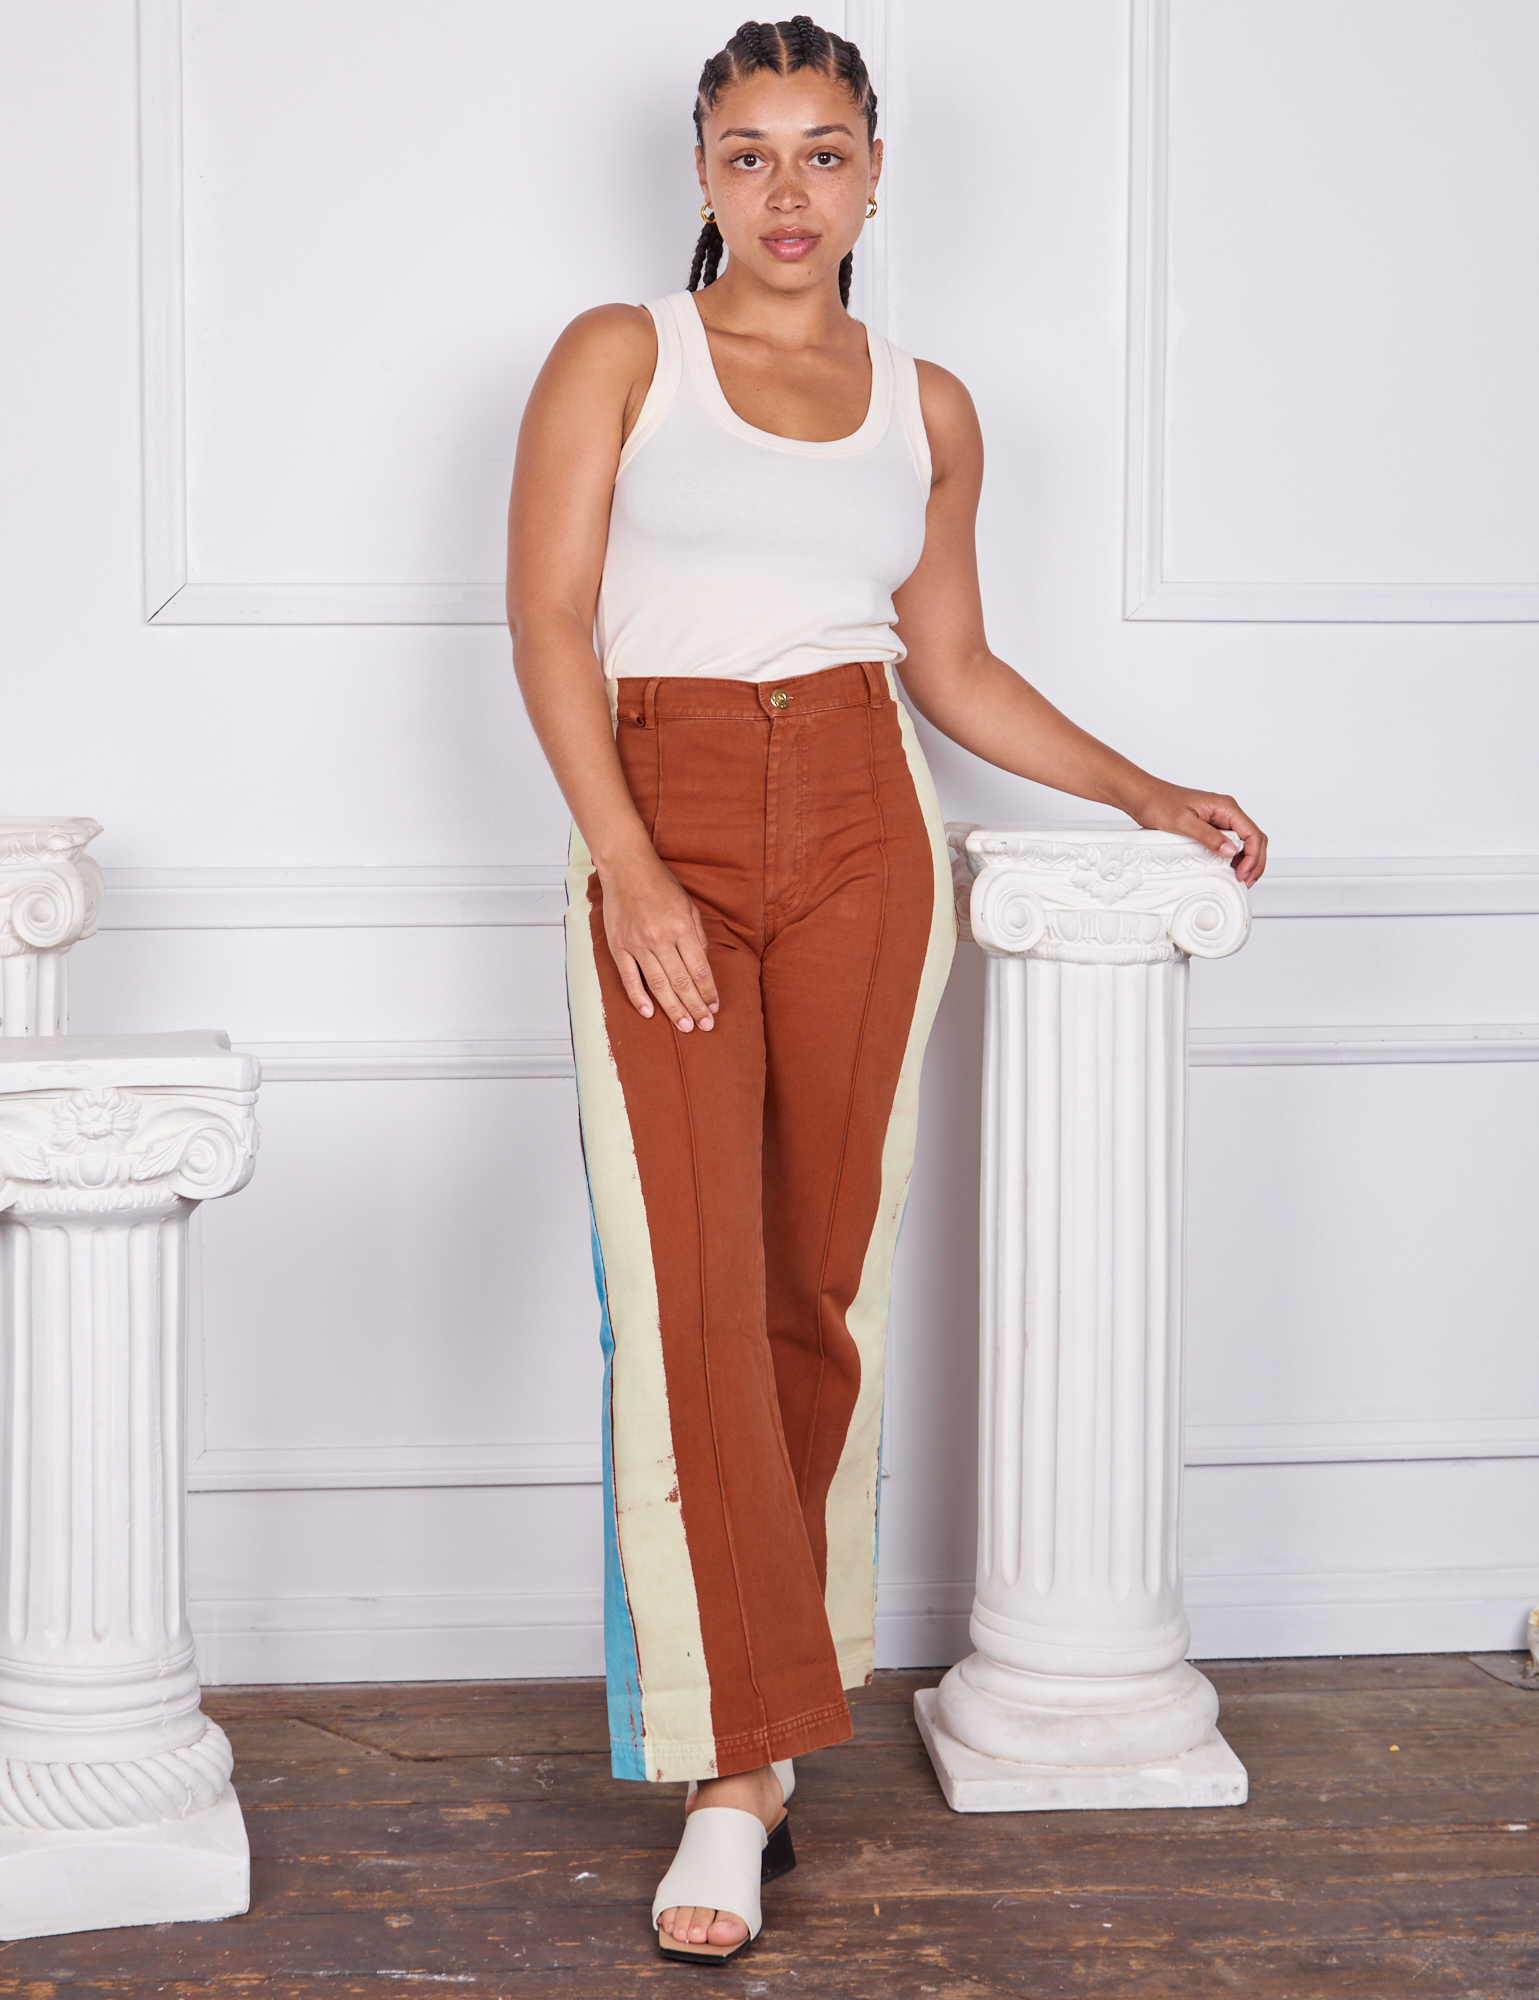 Gabi is wearing Hand-Painted Stripe Western Pants in Burnt Terracotta and a vintage off-white Tank Top